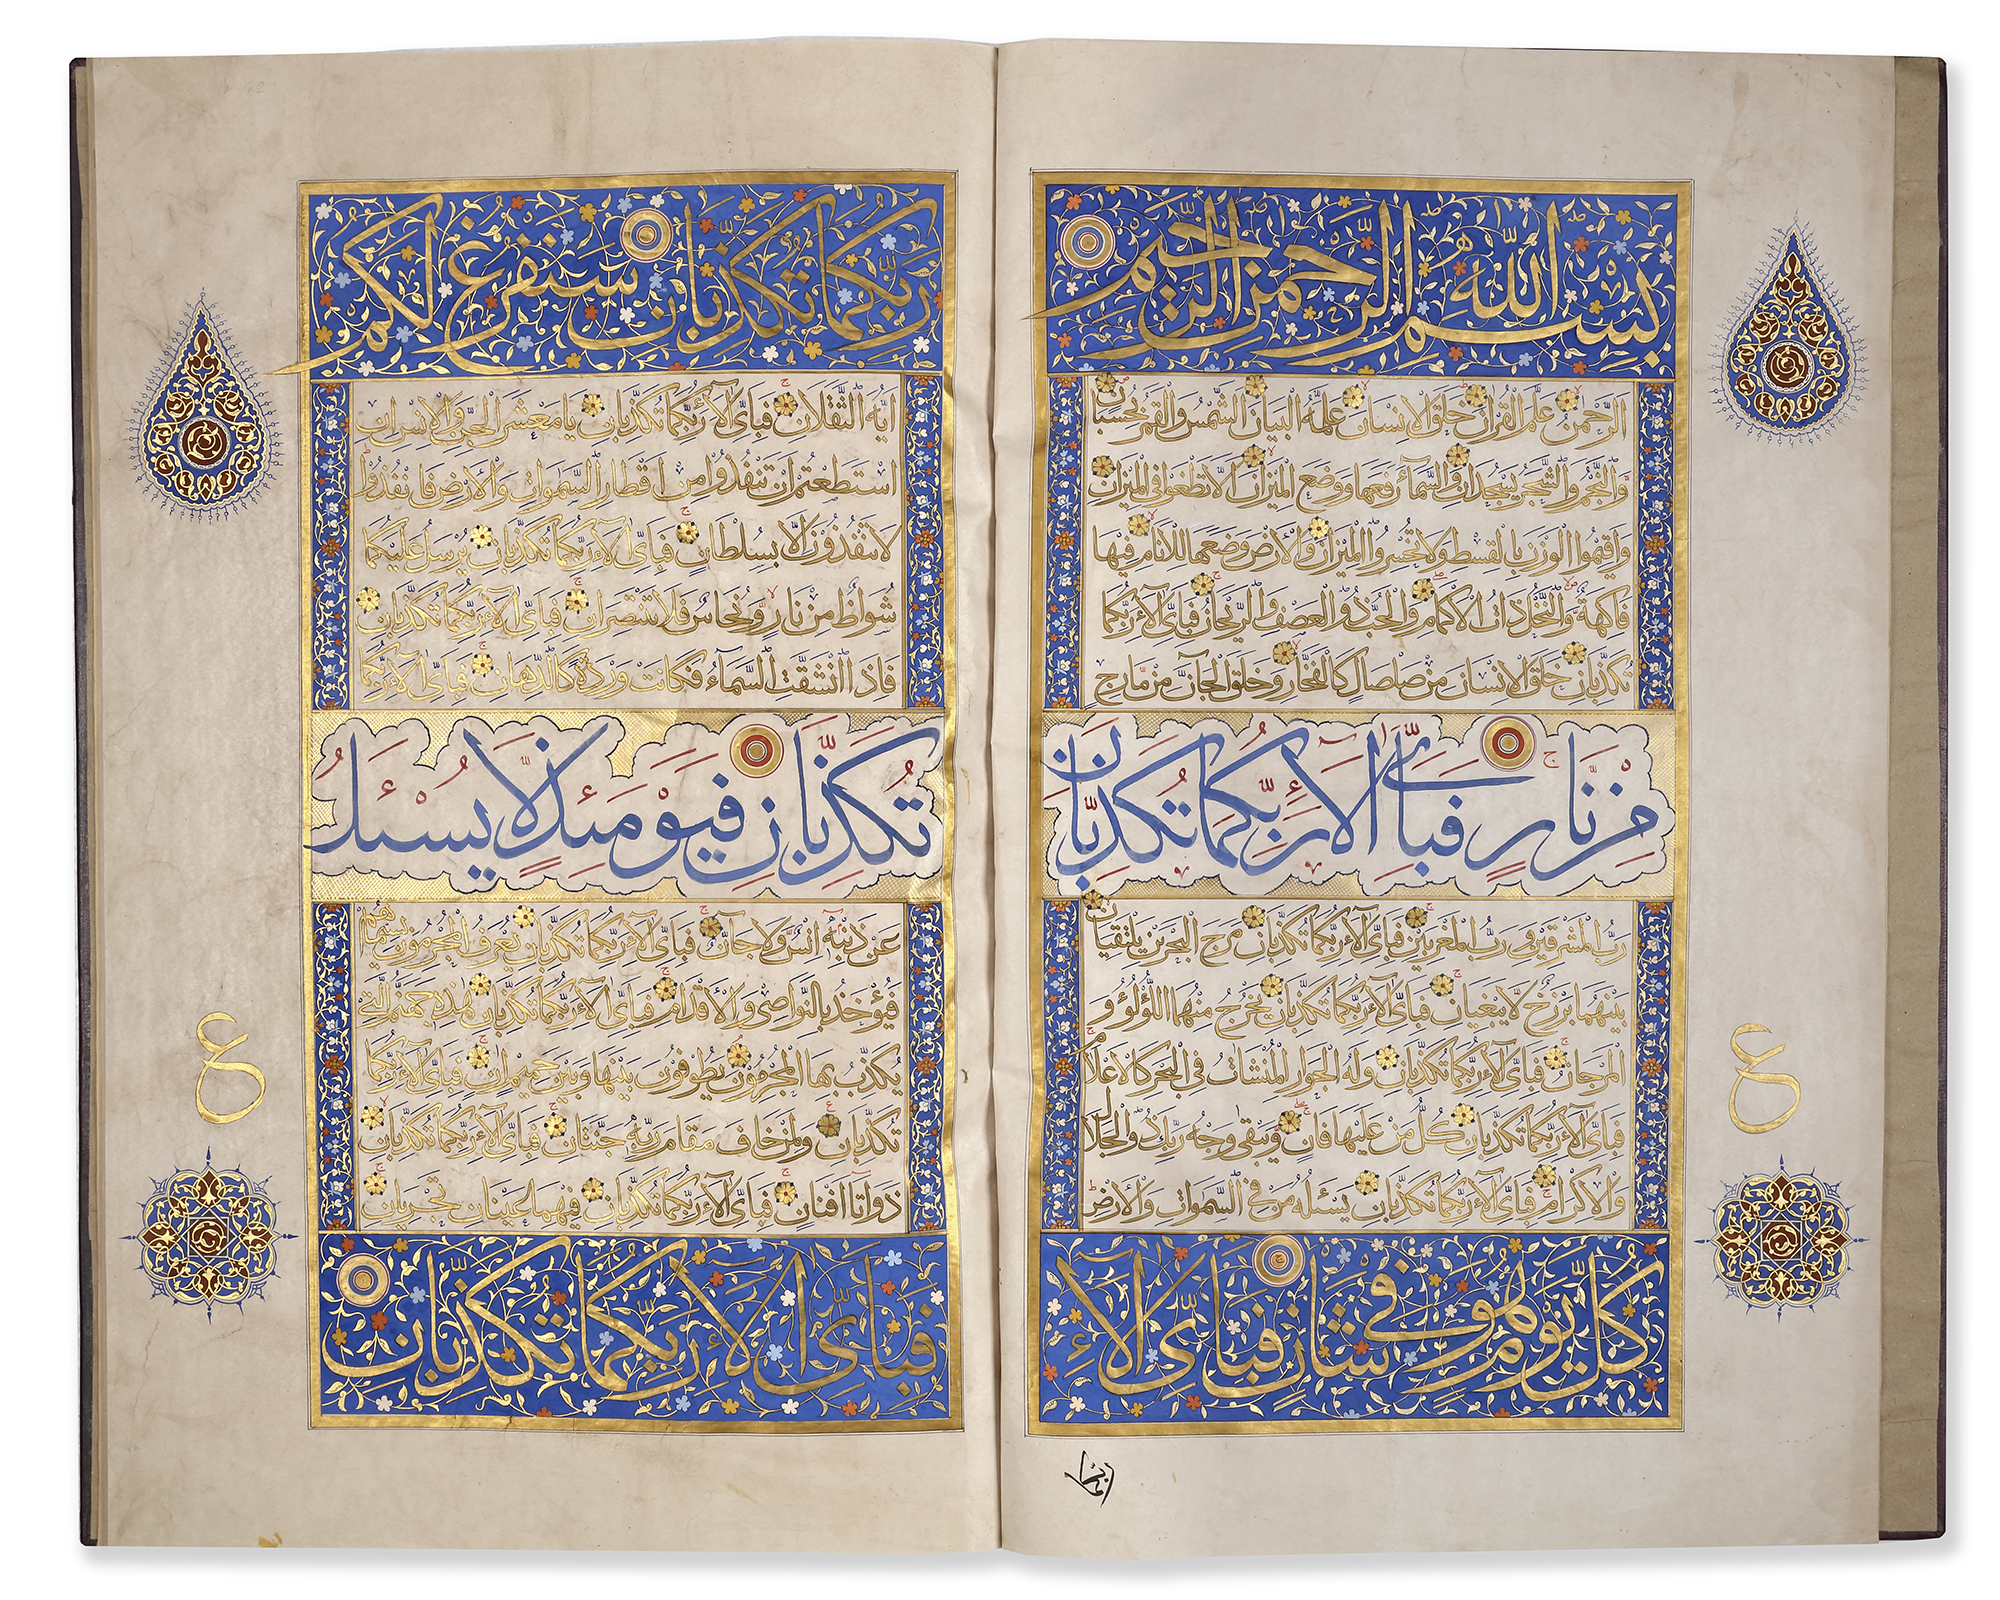 A LARGE ILLUMINATED QURAN JUZ, CENTRAL ASIA, LATE 19TH-EARLY 20TH CENTURY - Bild 3 aus 6